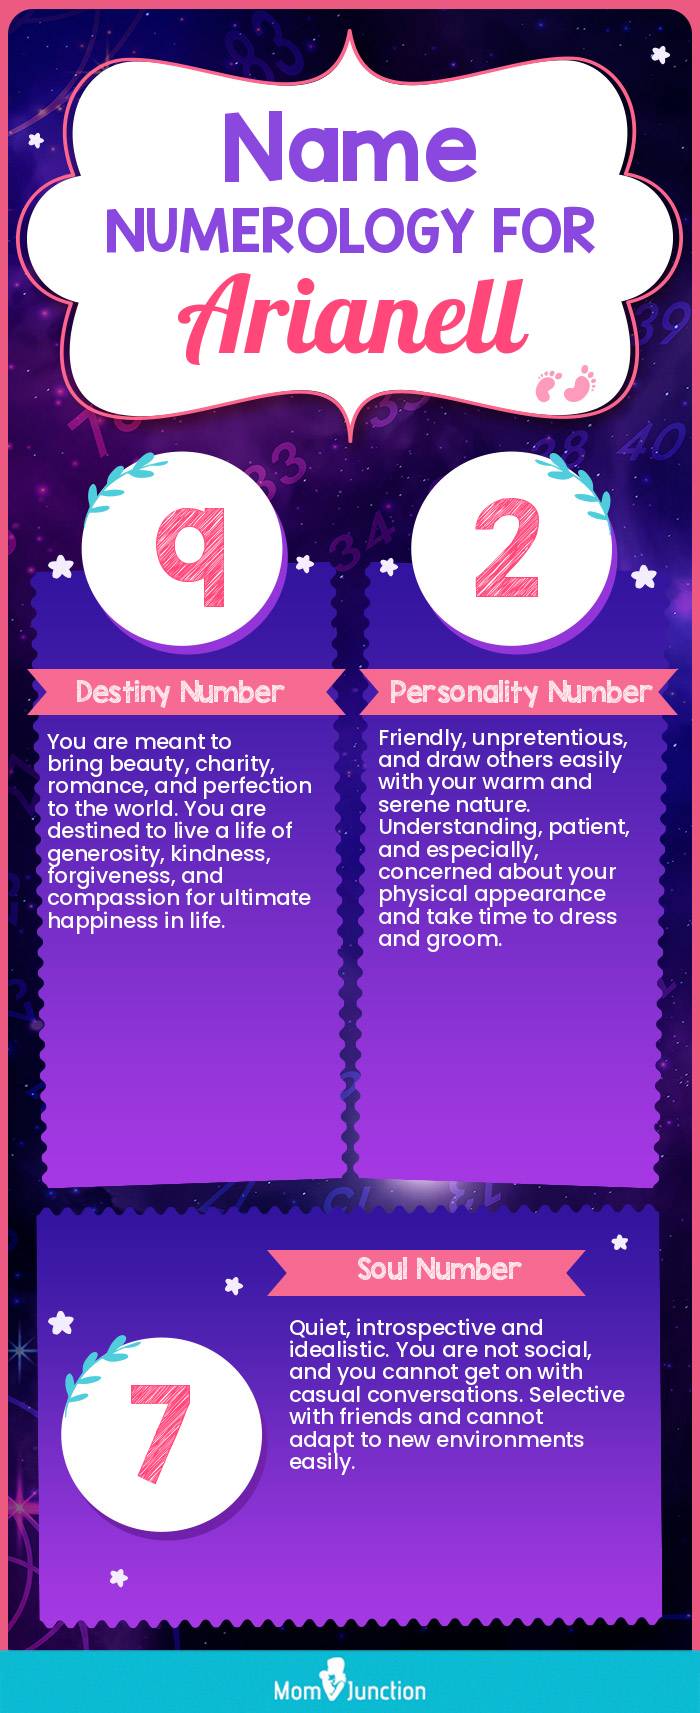 name-numerology-for-arianell-girl